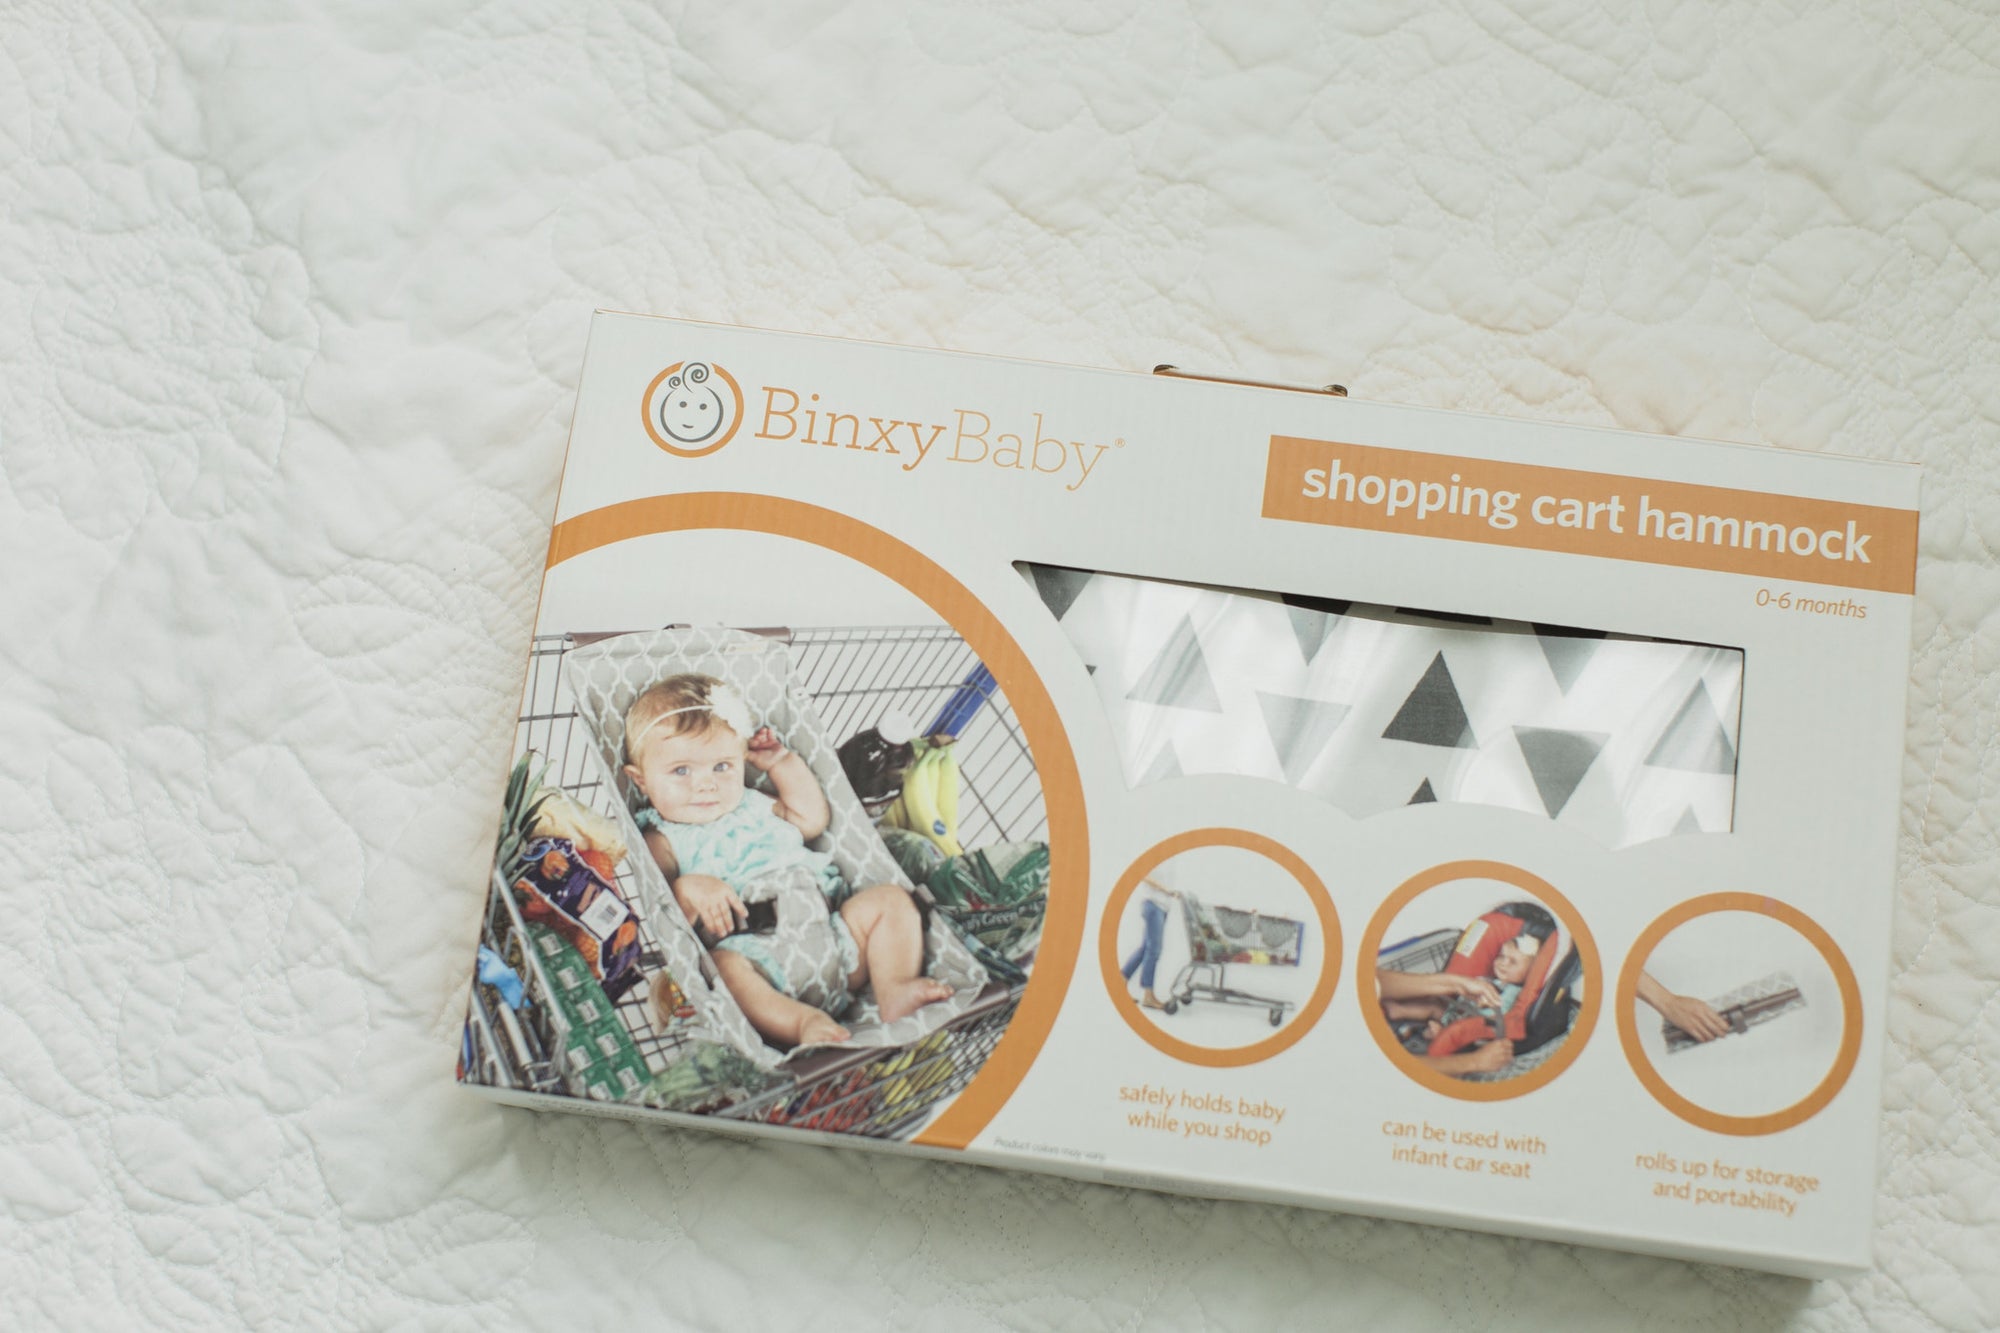 Binxy Baby | A Review + Giveaway